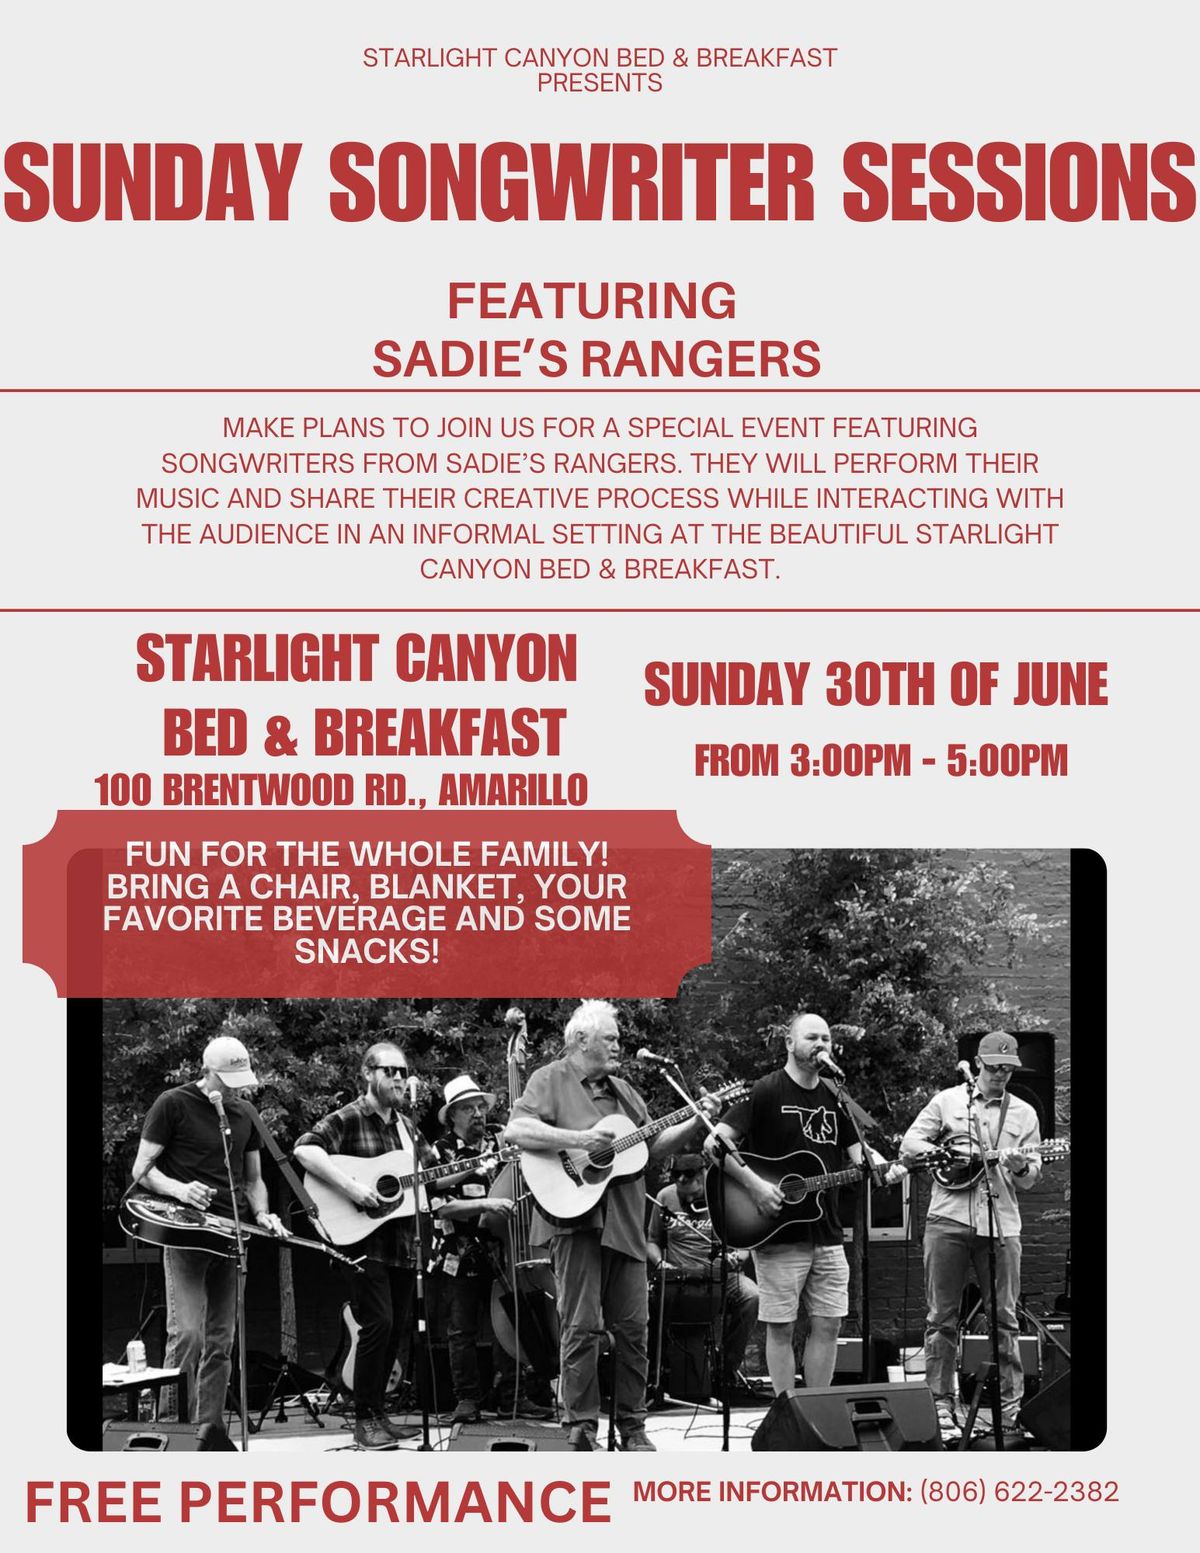 Sunday sessions at Starlight Canyon Bed & Breakfast